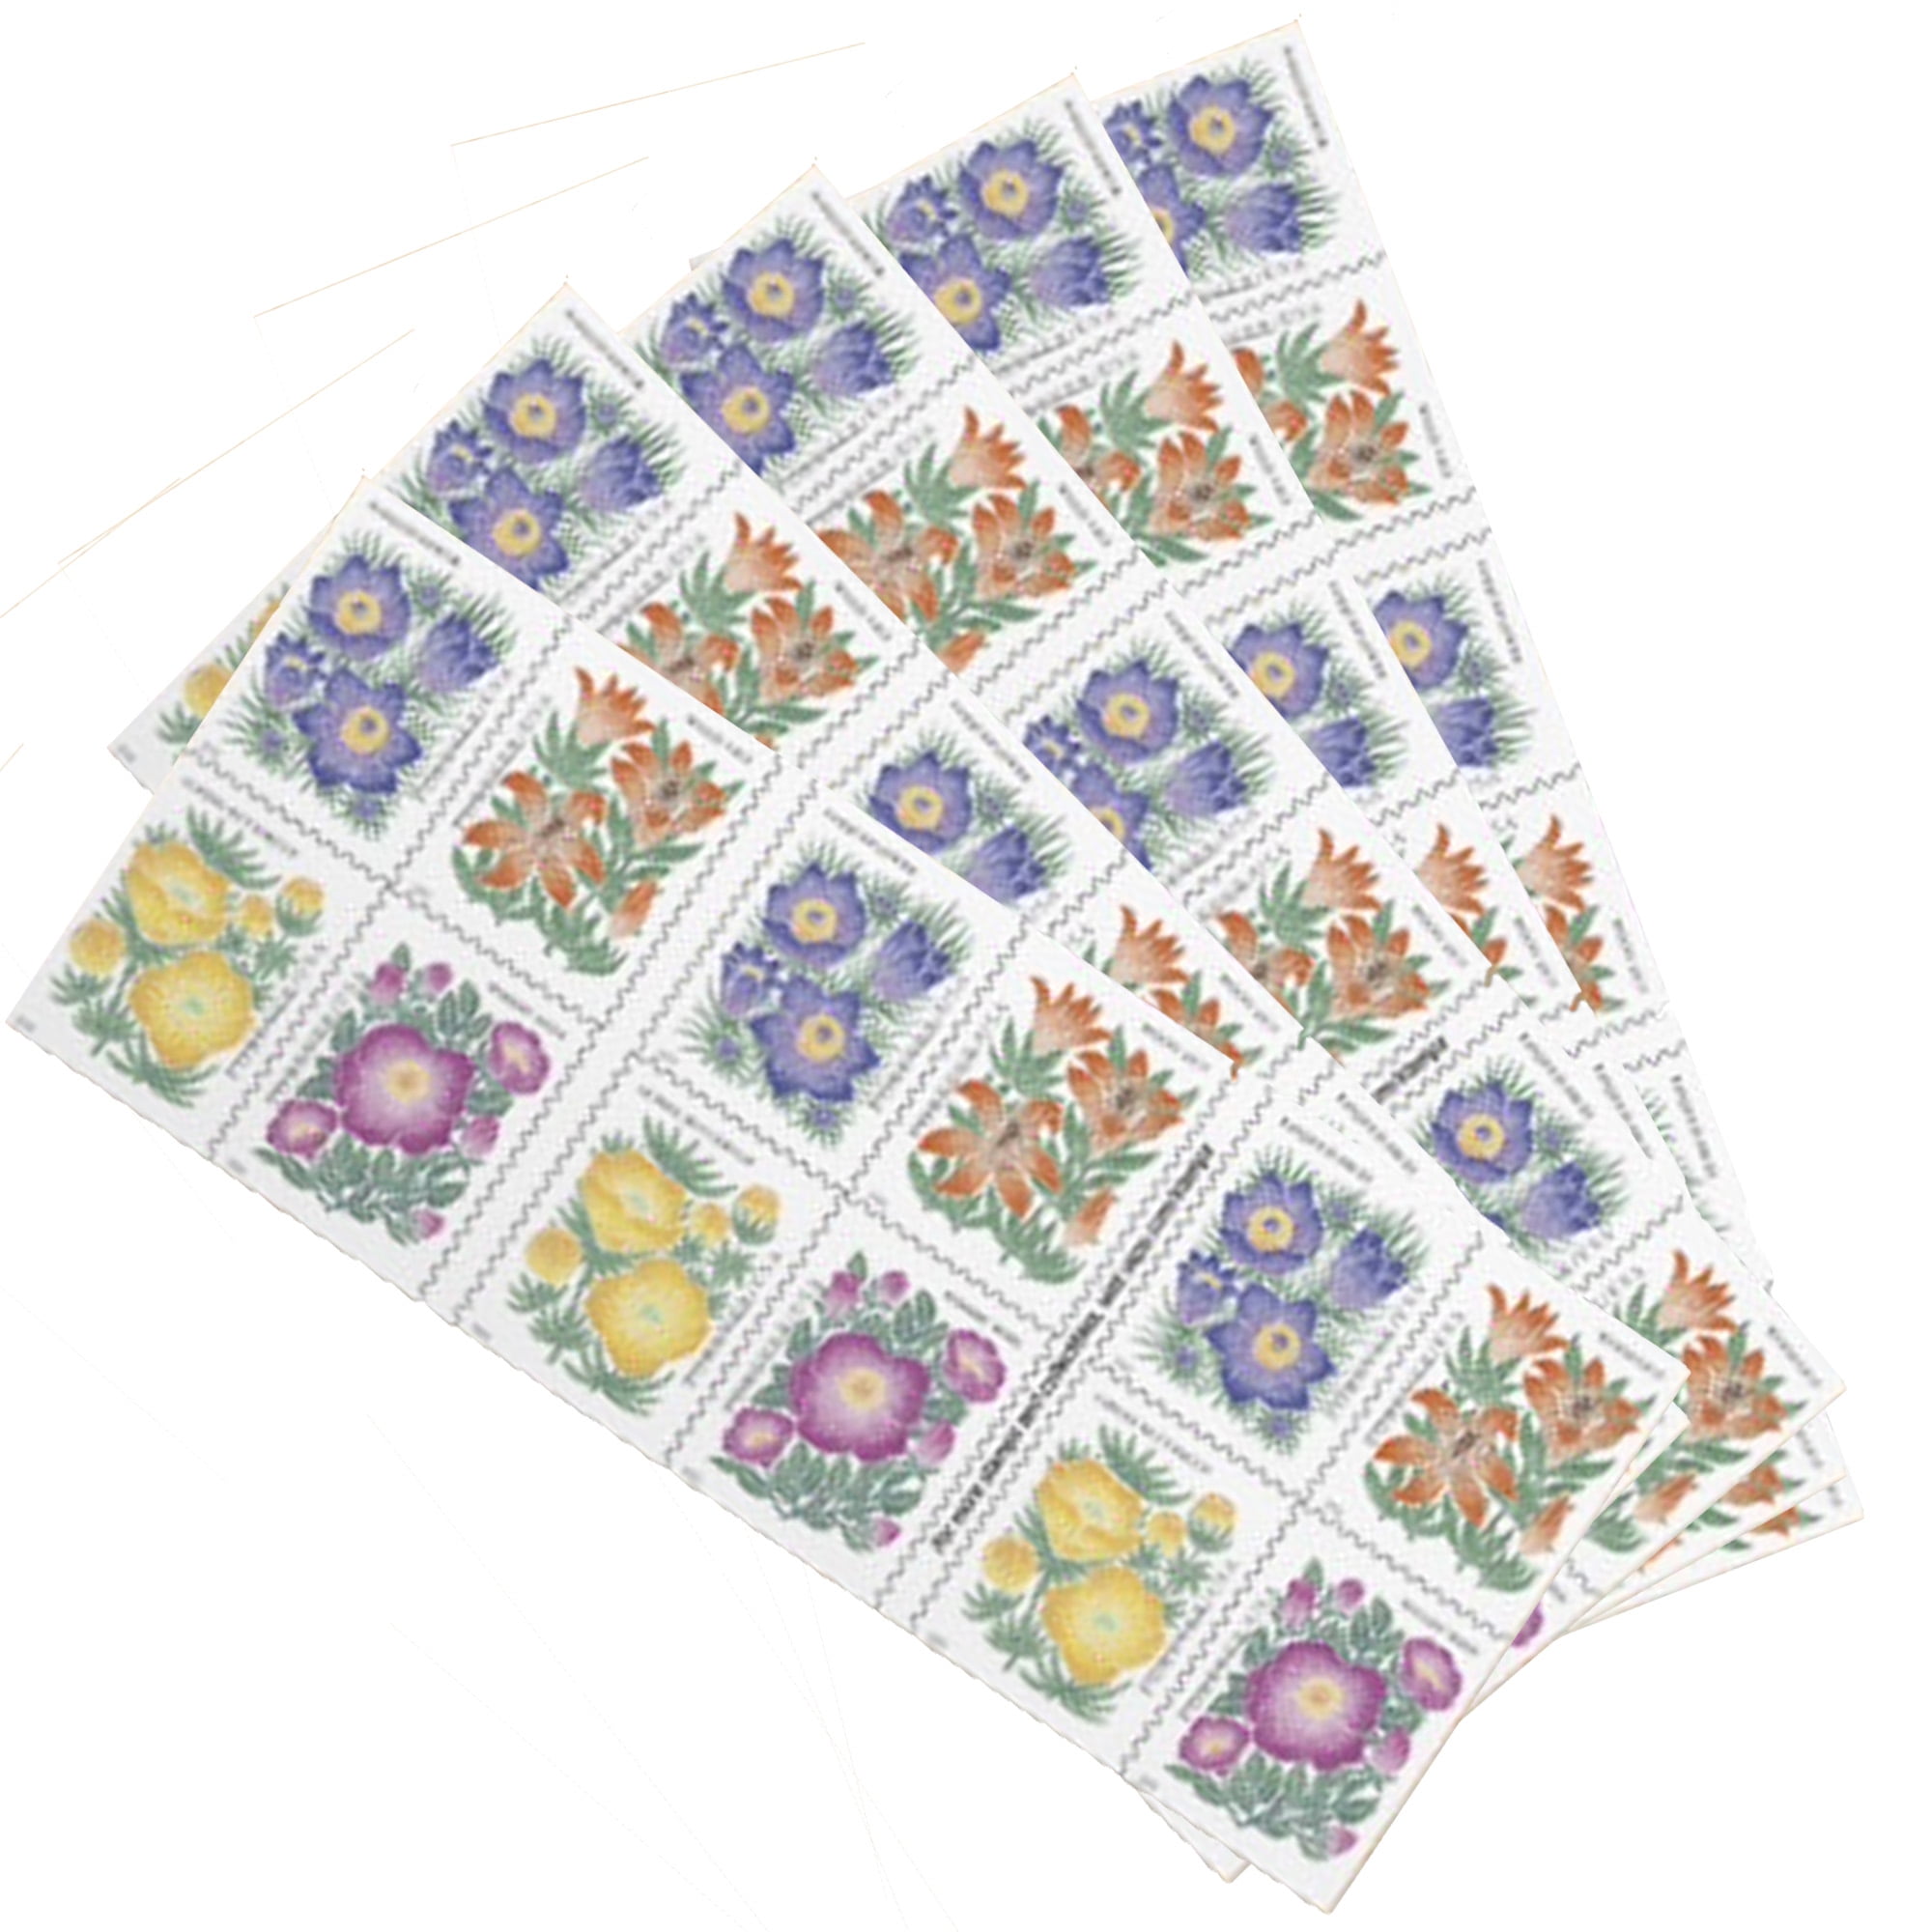 Tulip Blossoms USPS Forever Postage Stamp 1 Book of 20 US First Class  Postal Flower Spring Wedding Holiday Celebrate Announcement Party (20 Stamps)  